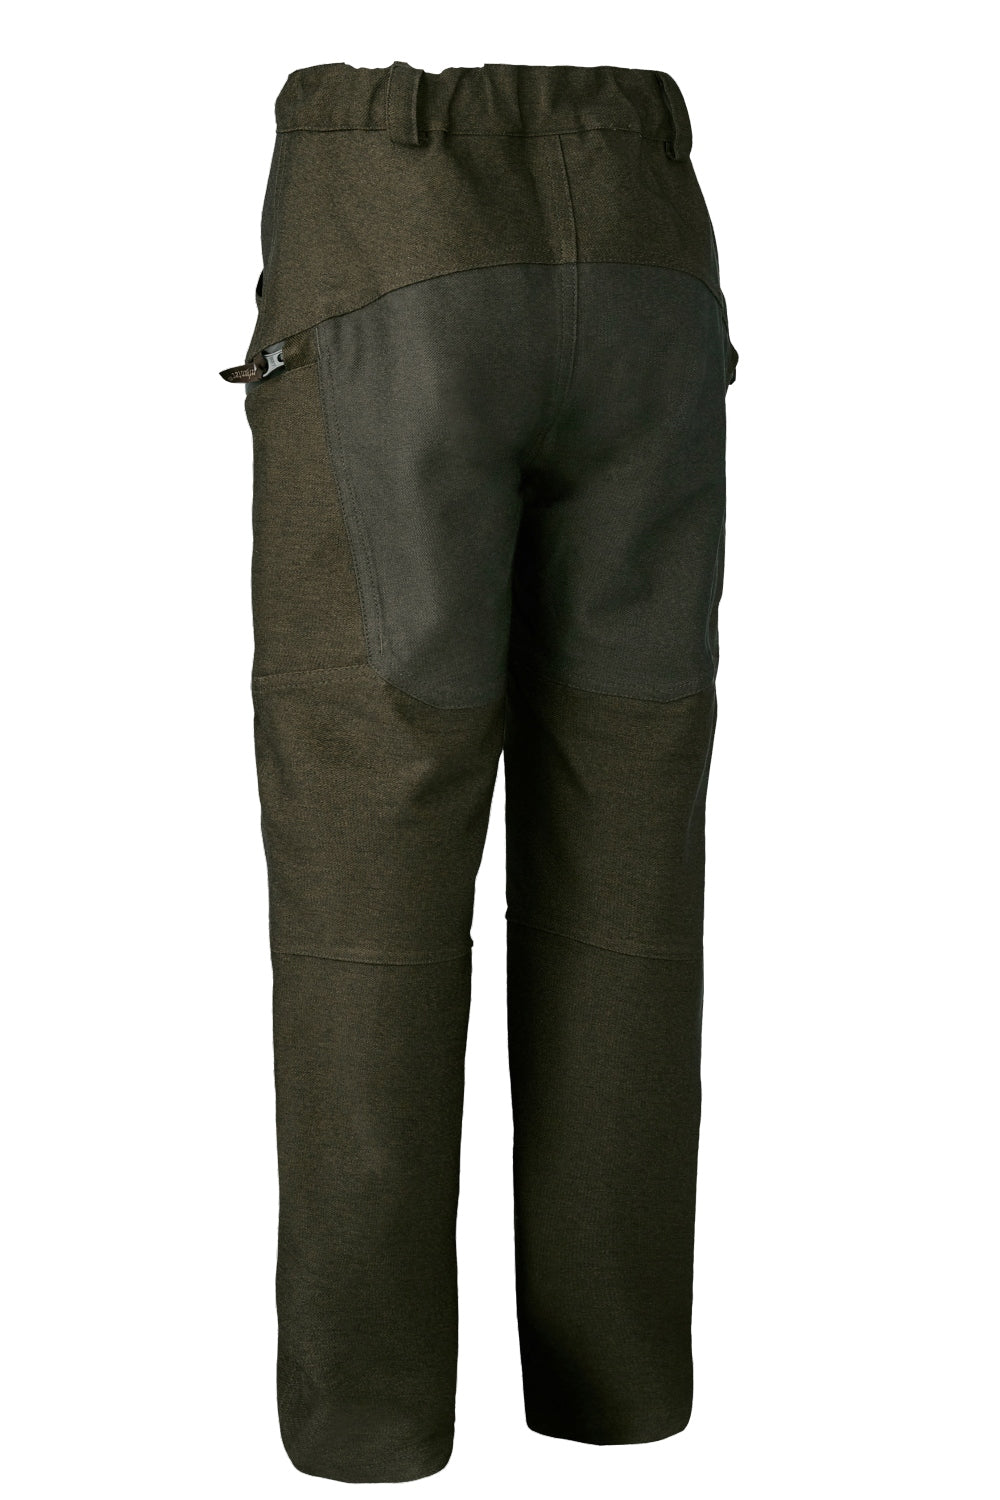 Deerhunter Youth Chasse Trouser